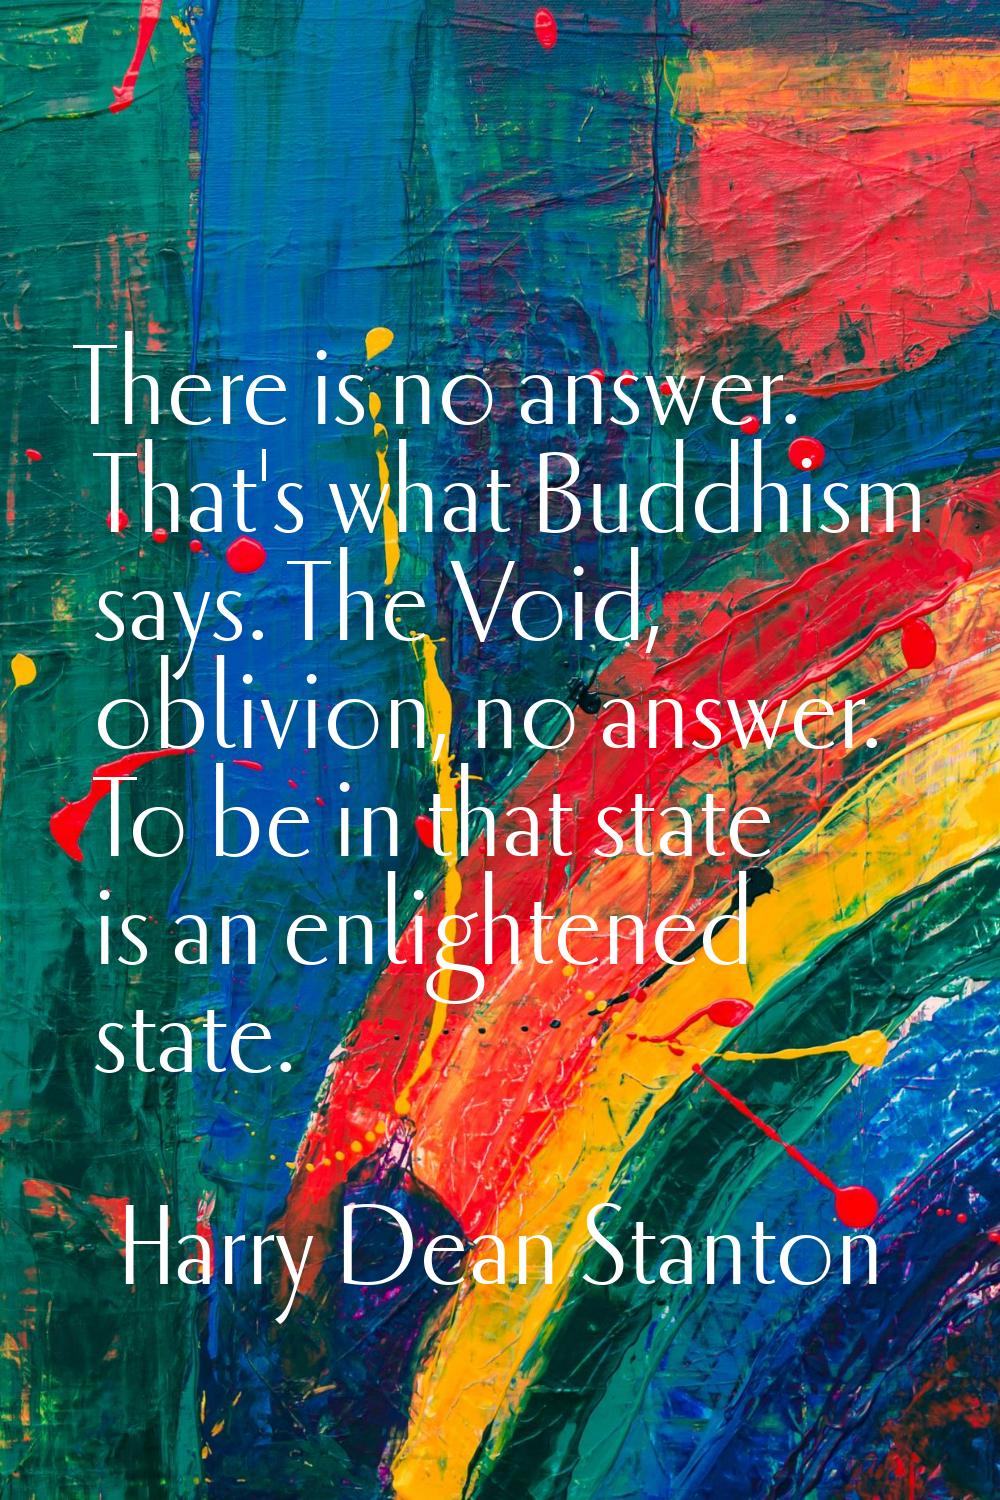 There is no answer. That's what Buddhism says. The Void, oblivion, no answer. To be in that state i